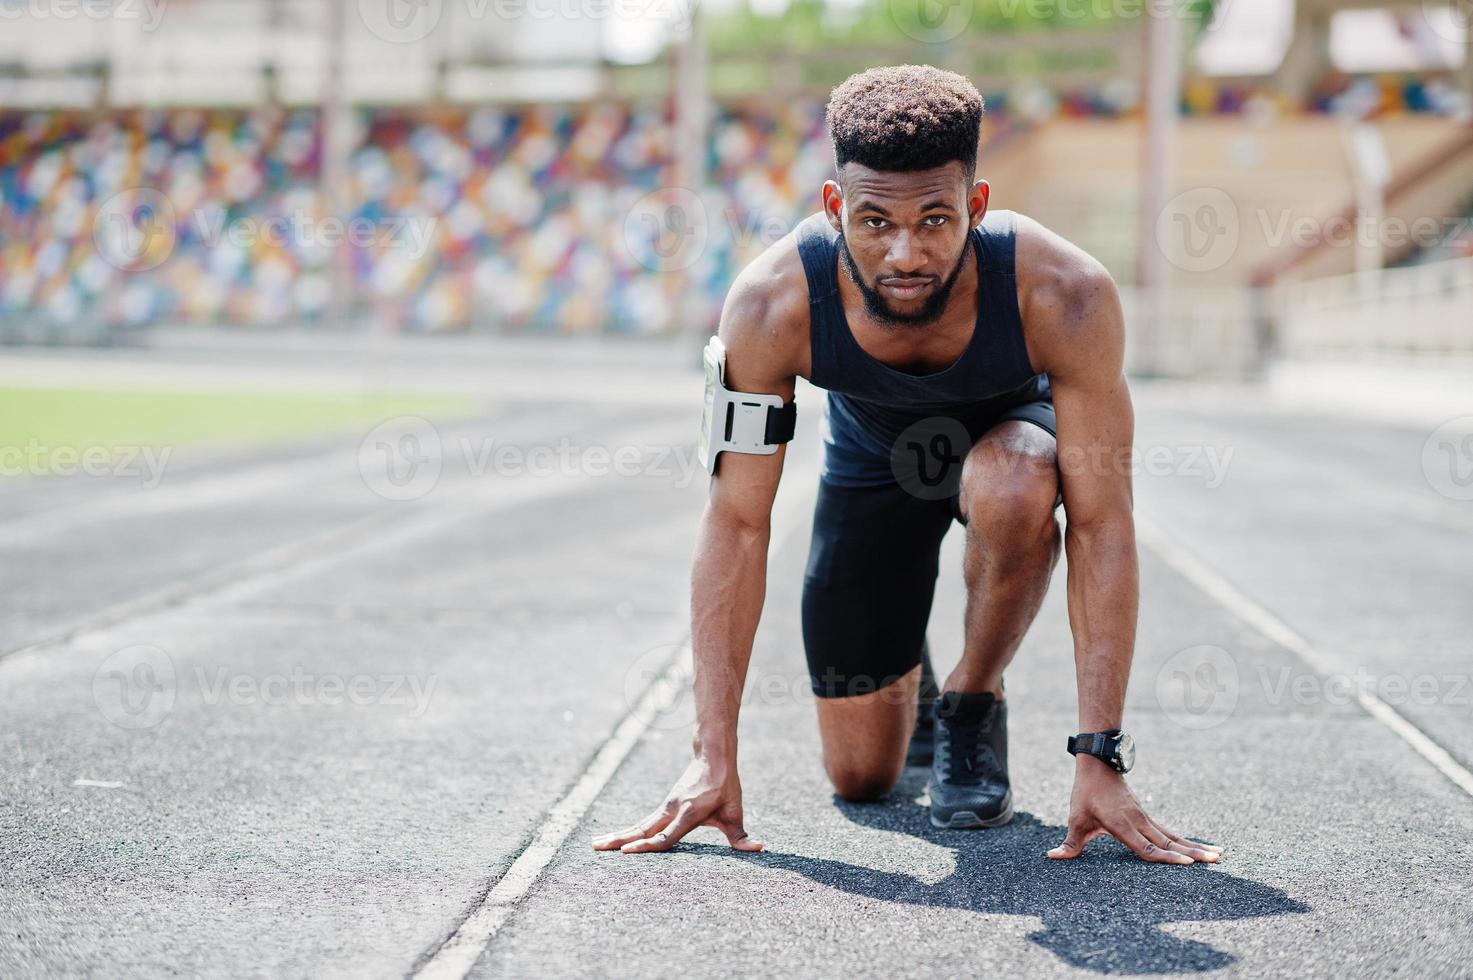 https://static.vecteezy.com/system/resources/previews/010/580/666/non_2x/african-american-male-athlete-in-sportswear-racing-alone-down-a-running-track-at-stadium-photo.jpg